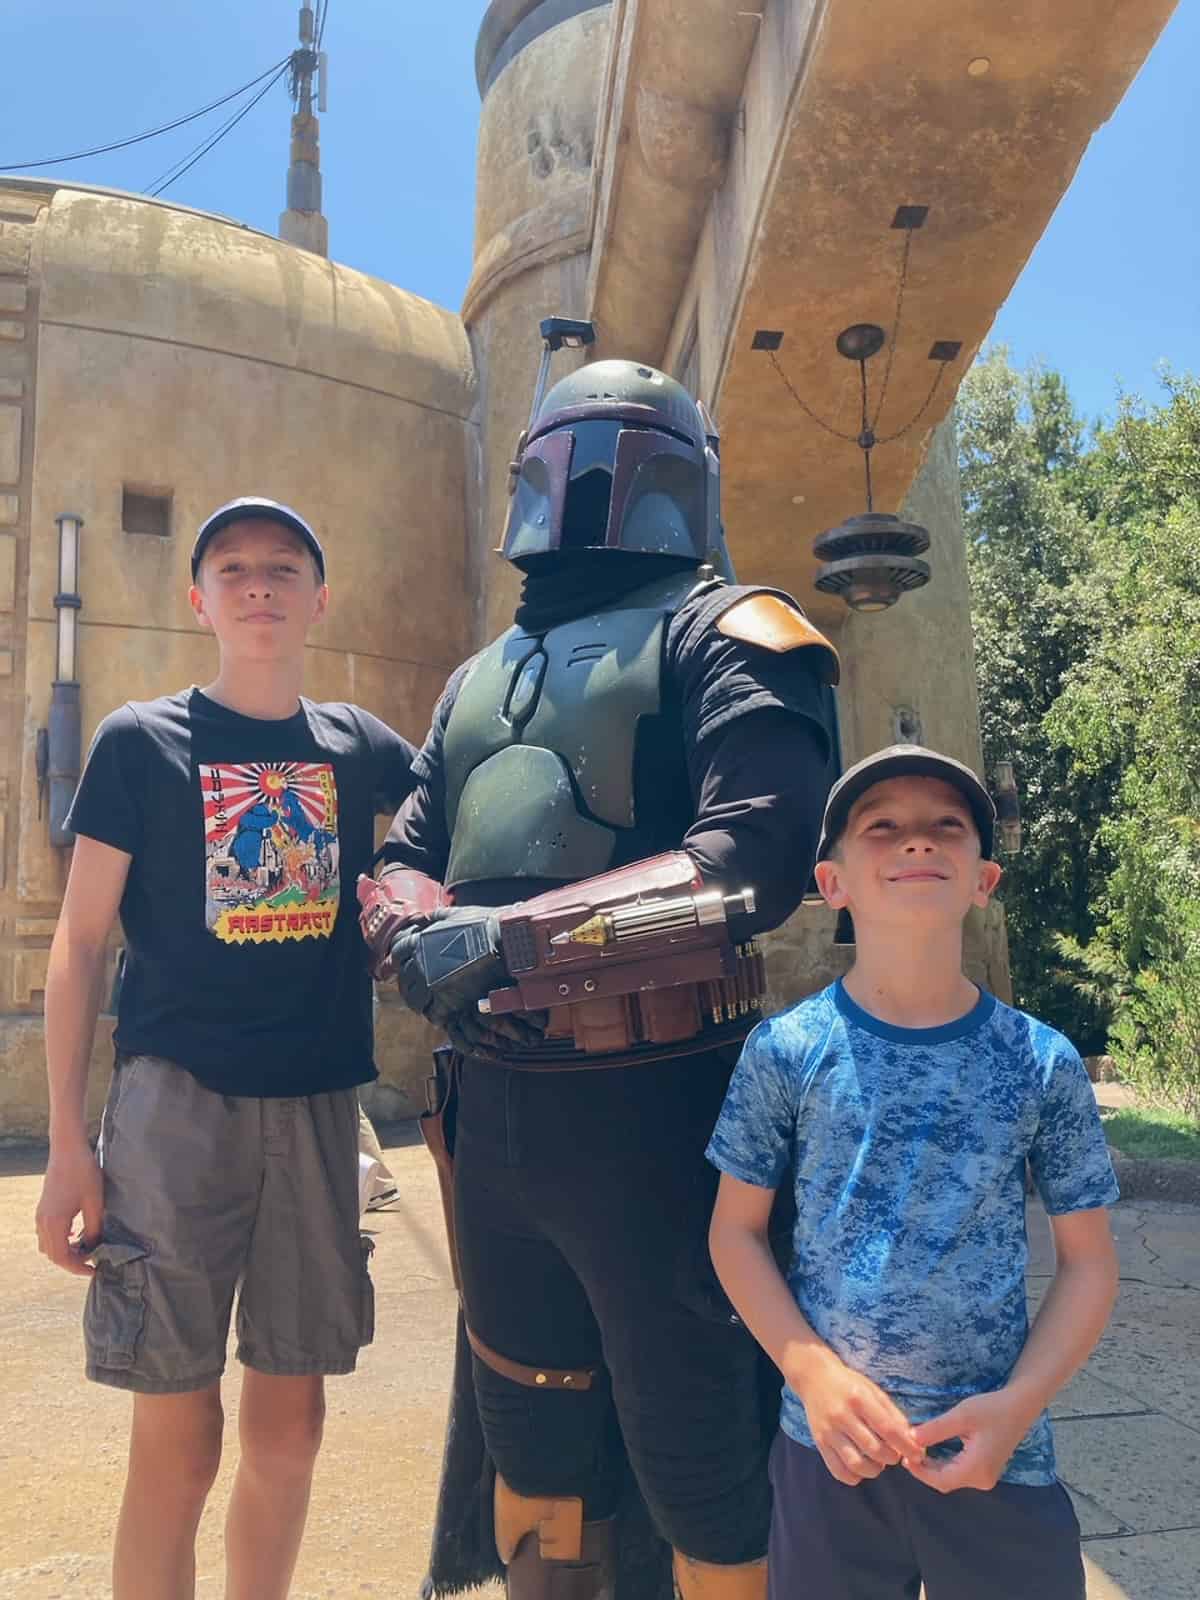 two kids at Disneyland with Boba Fett.